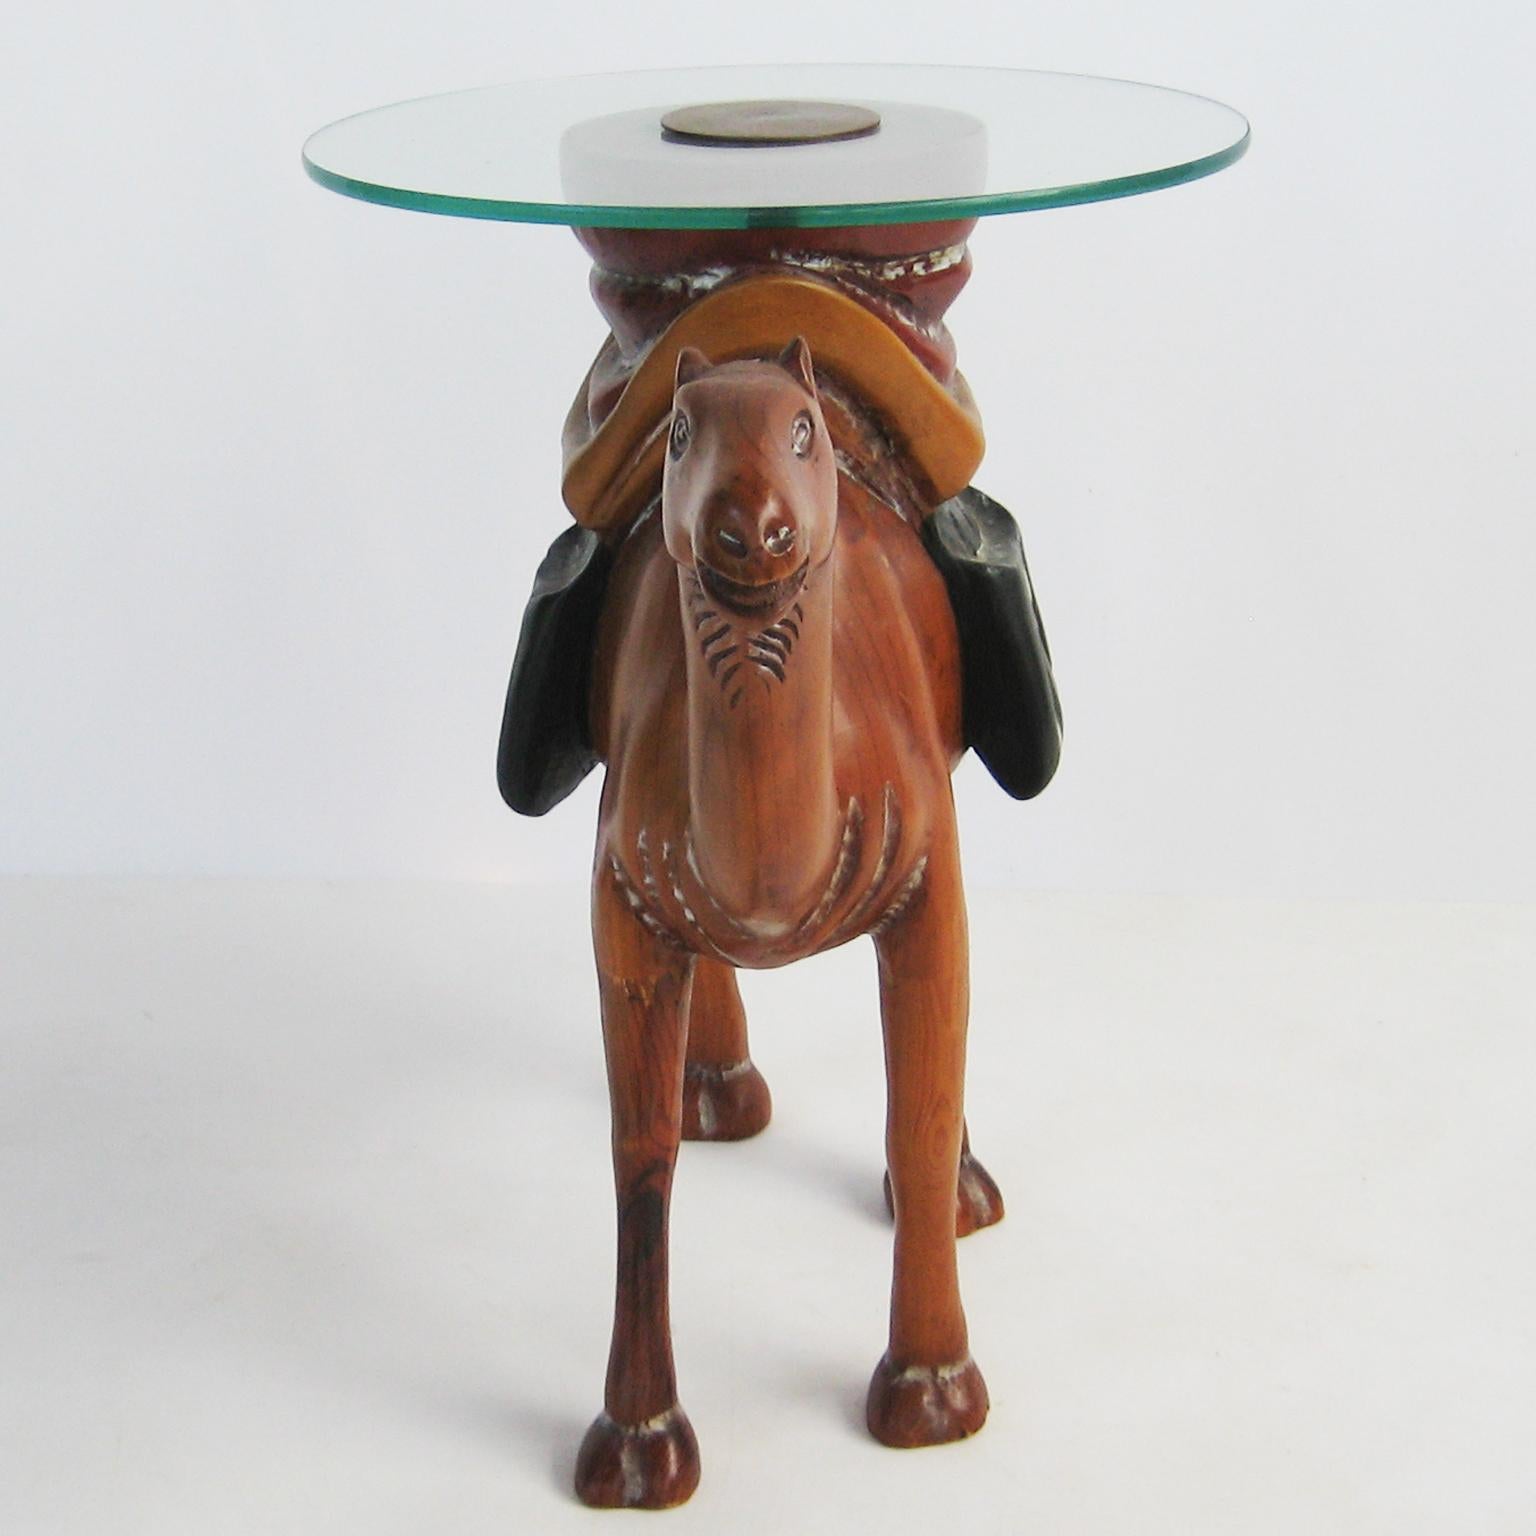 Side table, hand-carved into the form of a camel, with polychrome accents, a 16-inch glass top sits on top of its saddle. 

Stock ID: D2539